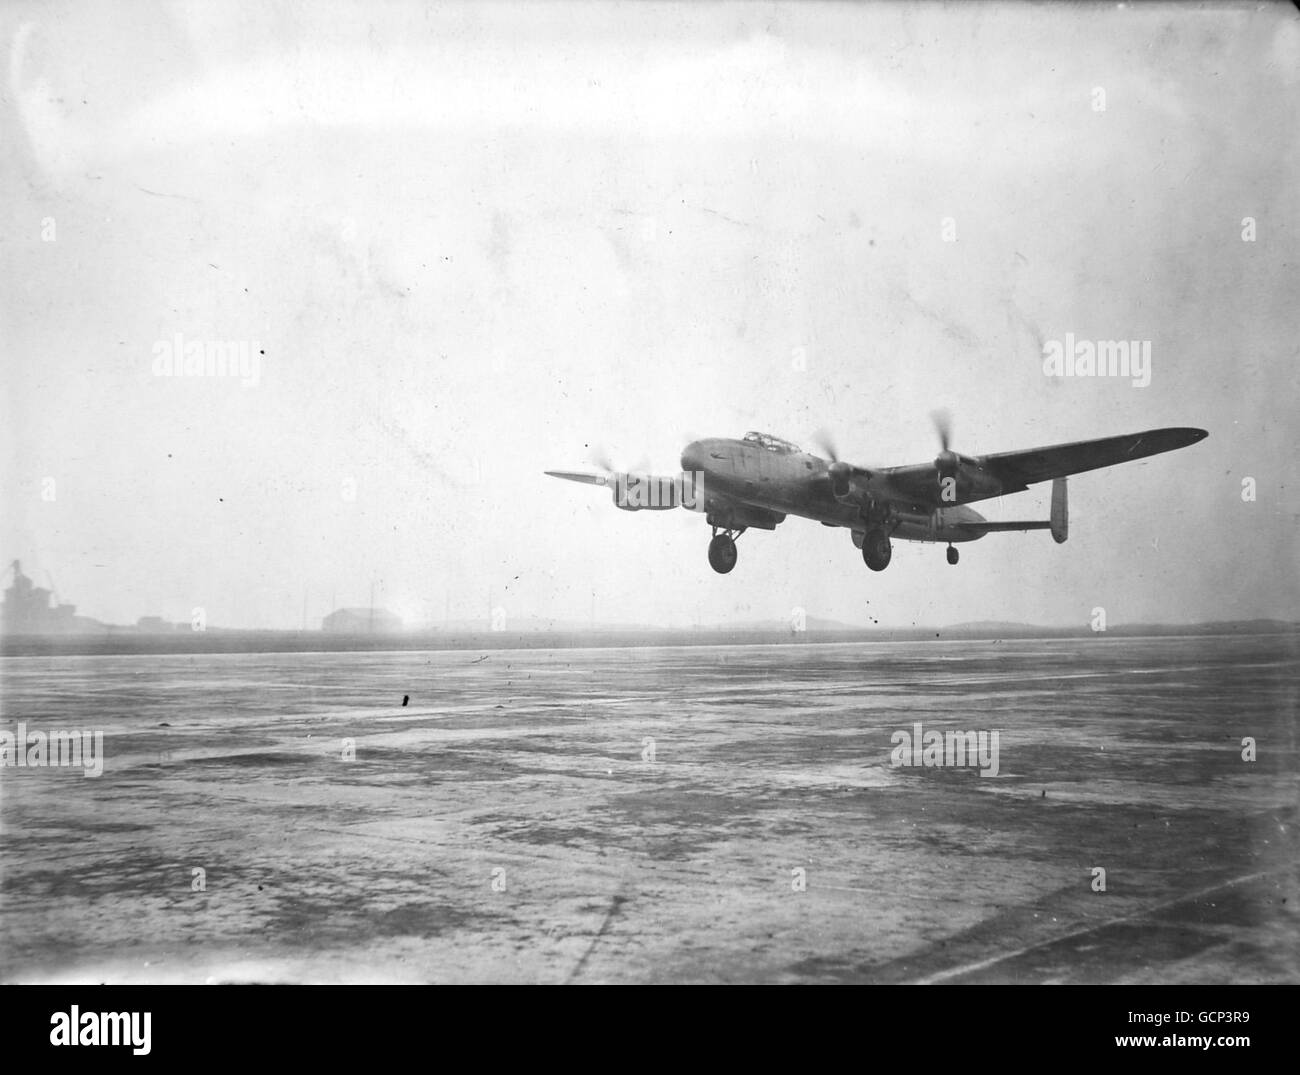 The Lancastrian airliner 'Starlight' made a proving flight on January 1st 1946 from Britain's 20,000,000 pound civilian aerodrome at Heath Row preparatory to the inauguration of a regular freight and passenger service to South America. Picture Shows - The Lancastrian aircraft 'Starlight' taking off from Heath Row aerodrome this morning, for South America. Stock Photo